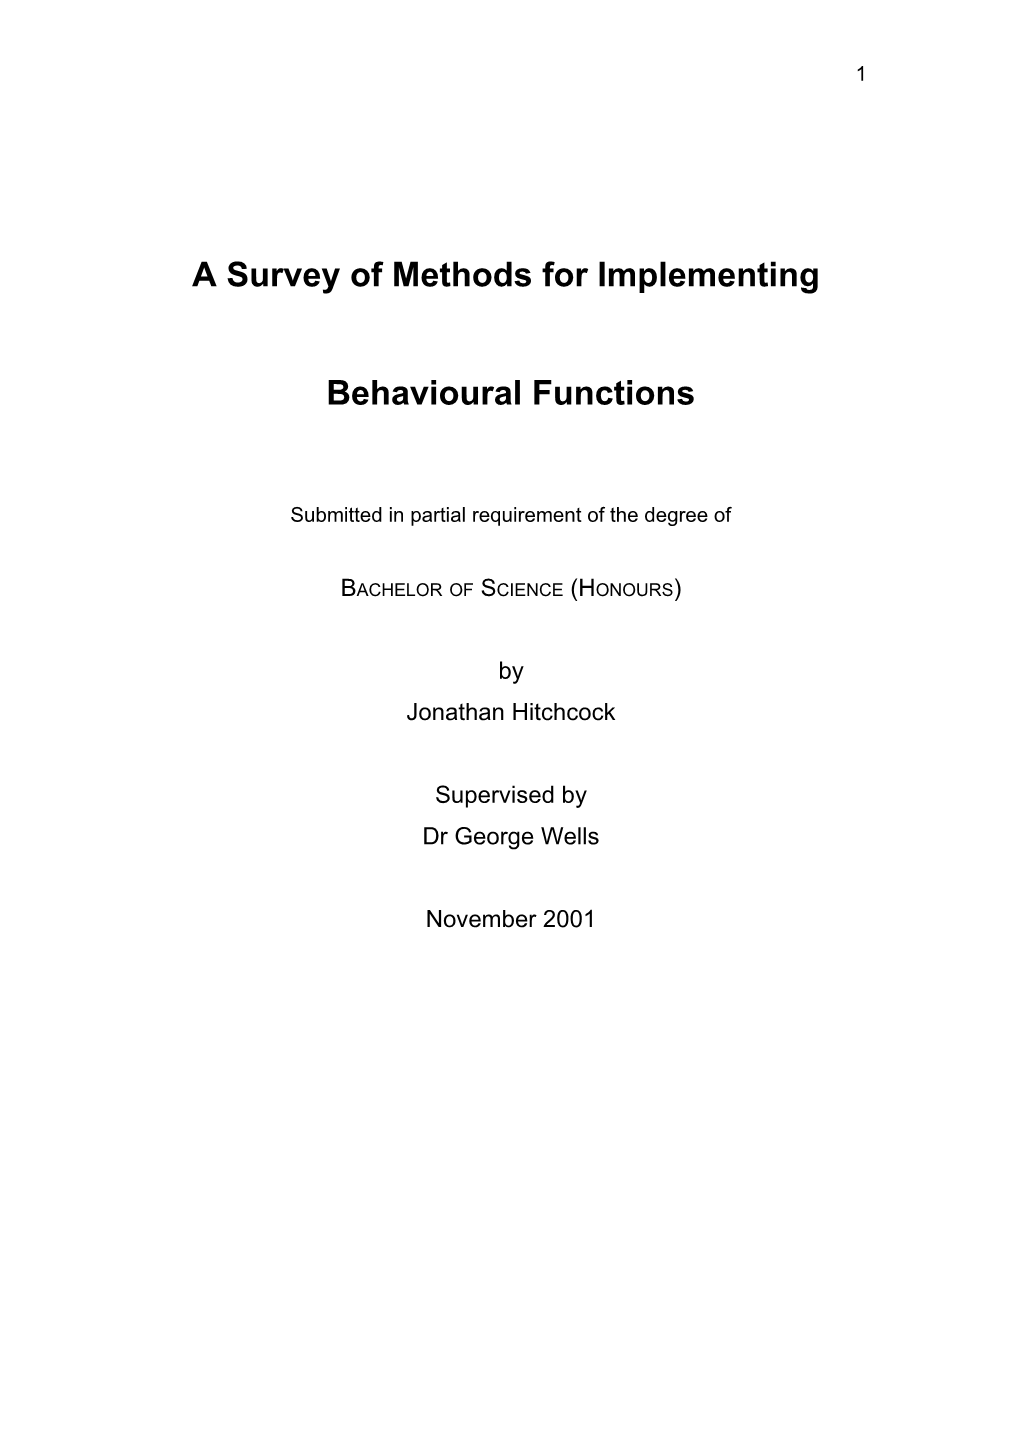 A Survey of Methods for Implementing